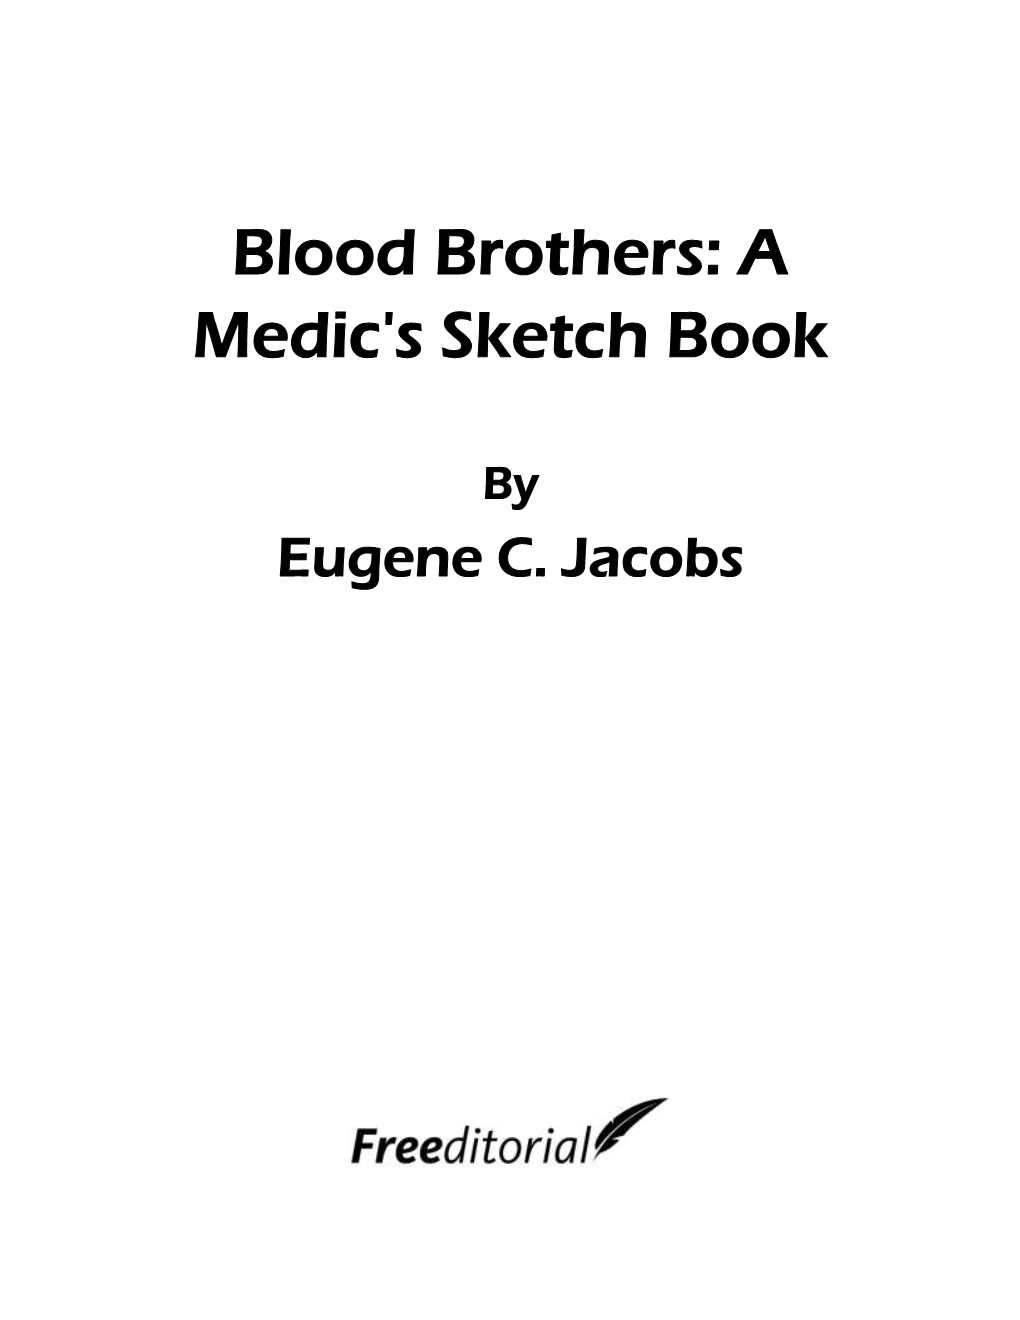 Blood Brothers: a Medic's Sketch Book